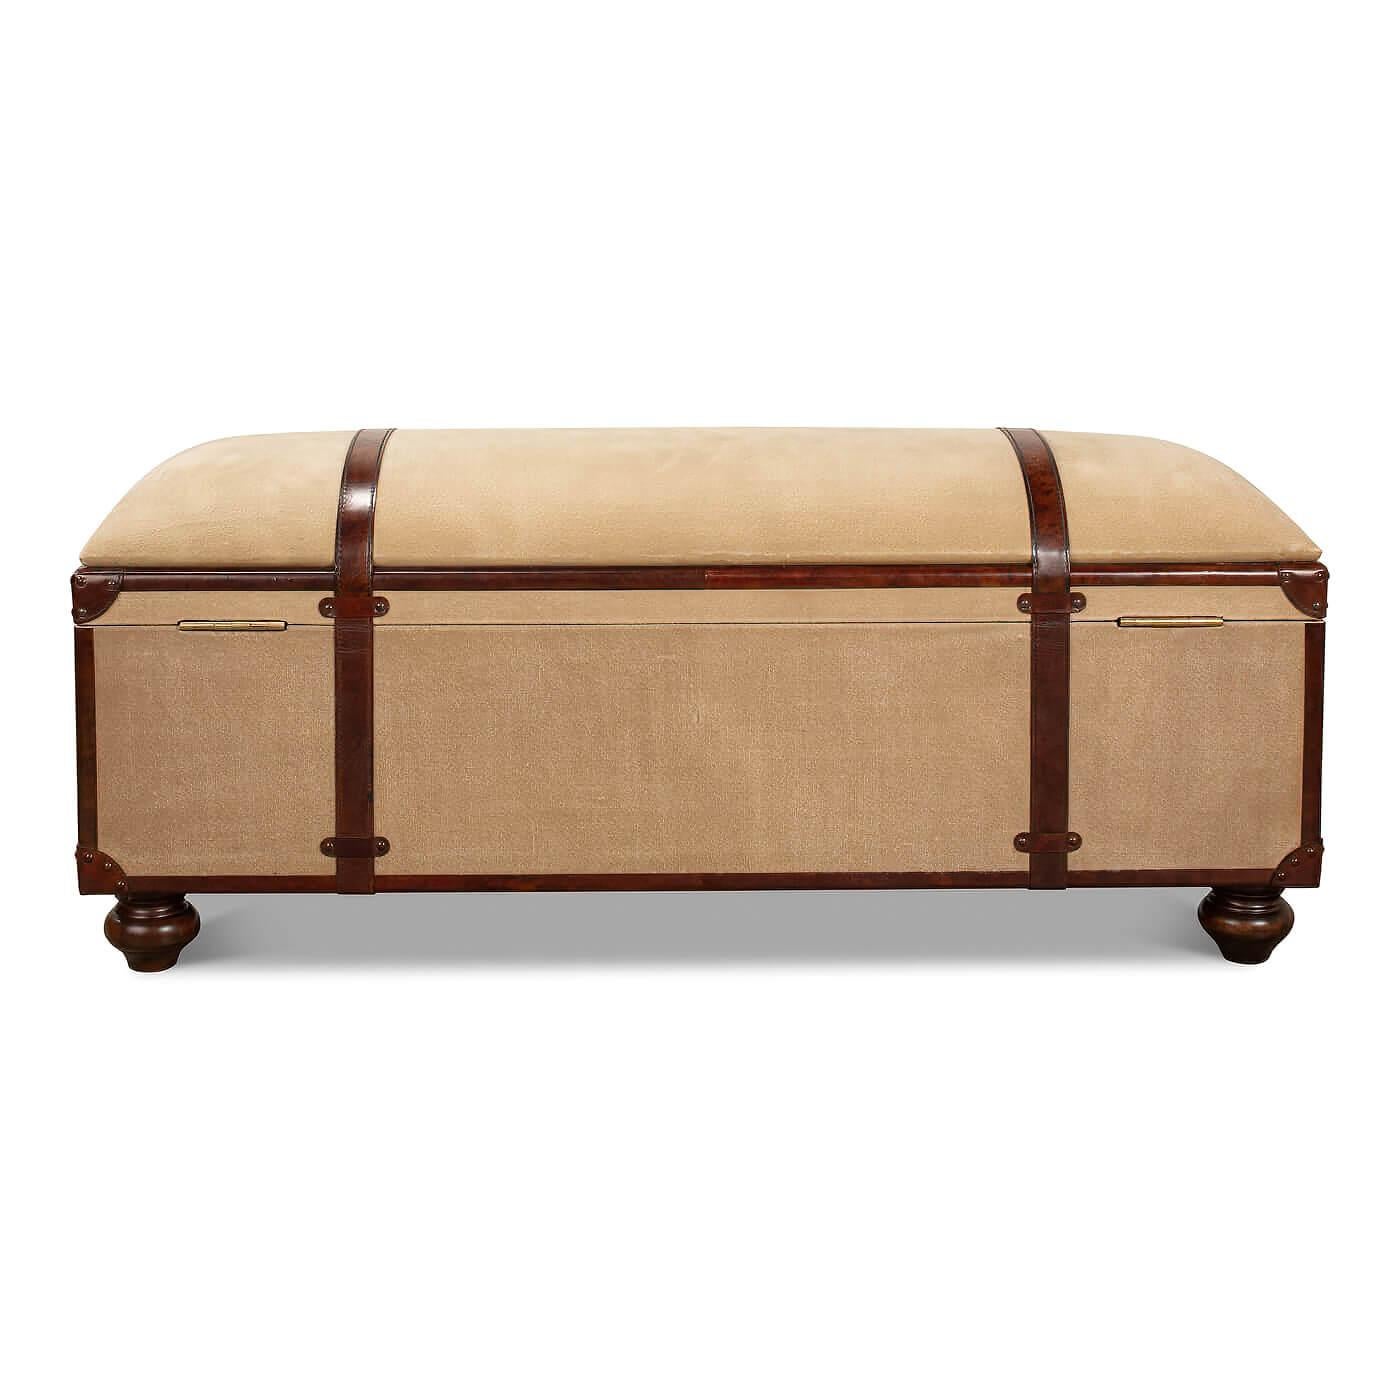 A vintage-style leather and canvas trunk bench. This bench is wrapped in beige canvas and has leather-wrapped edges and corners with brass. Inspired by the look of a vintage luggage travel trunk, it has leather strap accents going from front to back